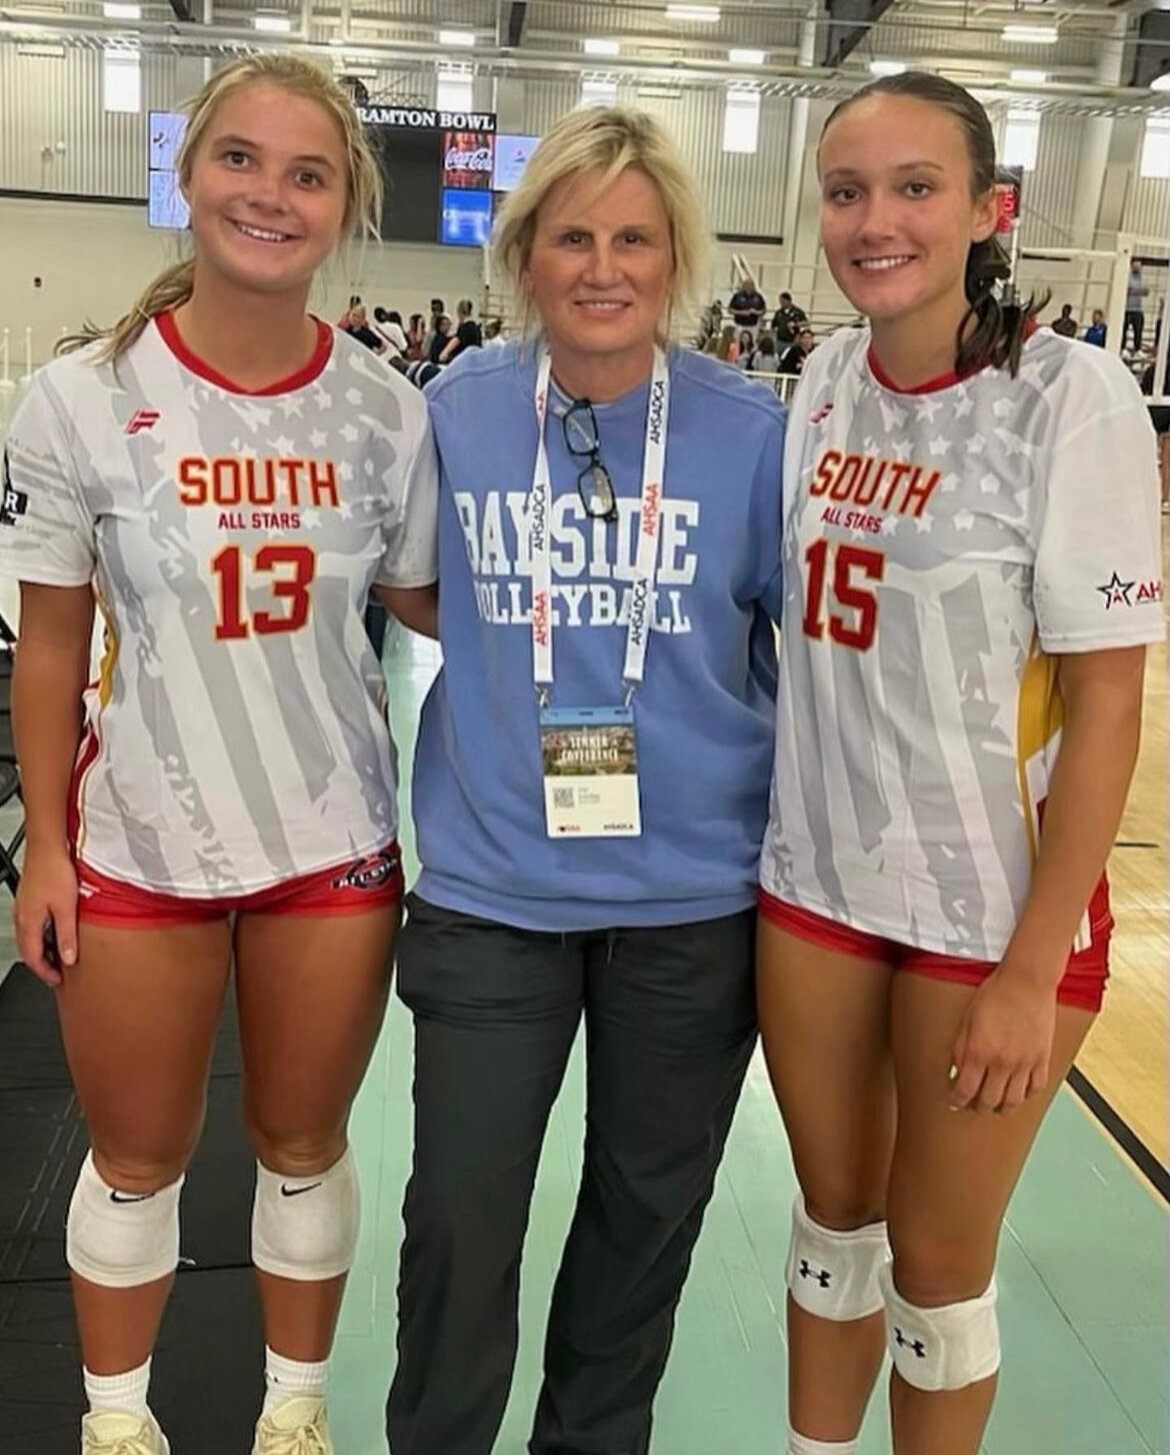 Bayside Academy head volleyball coach Ann Schilling joined her All-Star Admirals, Maysie Douglas (13) and Blakeley Robbins (15) after the North-South classic in Montgomery on Thursday, July 20. The pair of athletes helped the South score a 3-1 win.